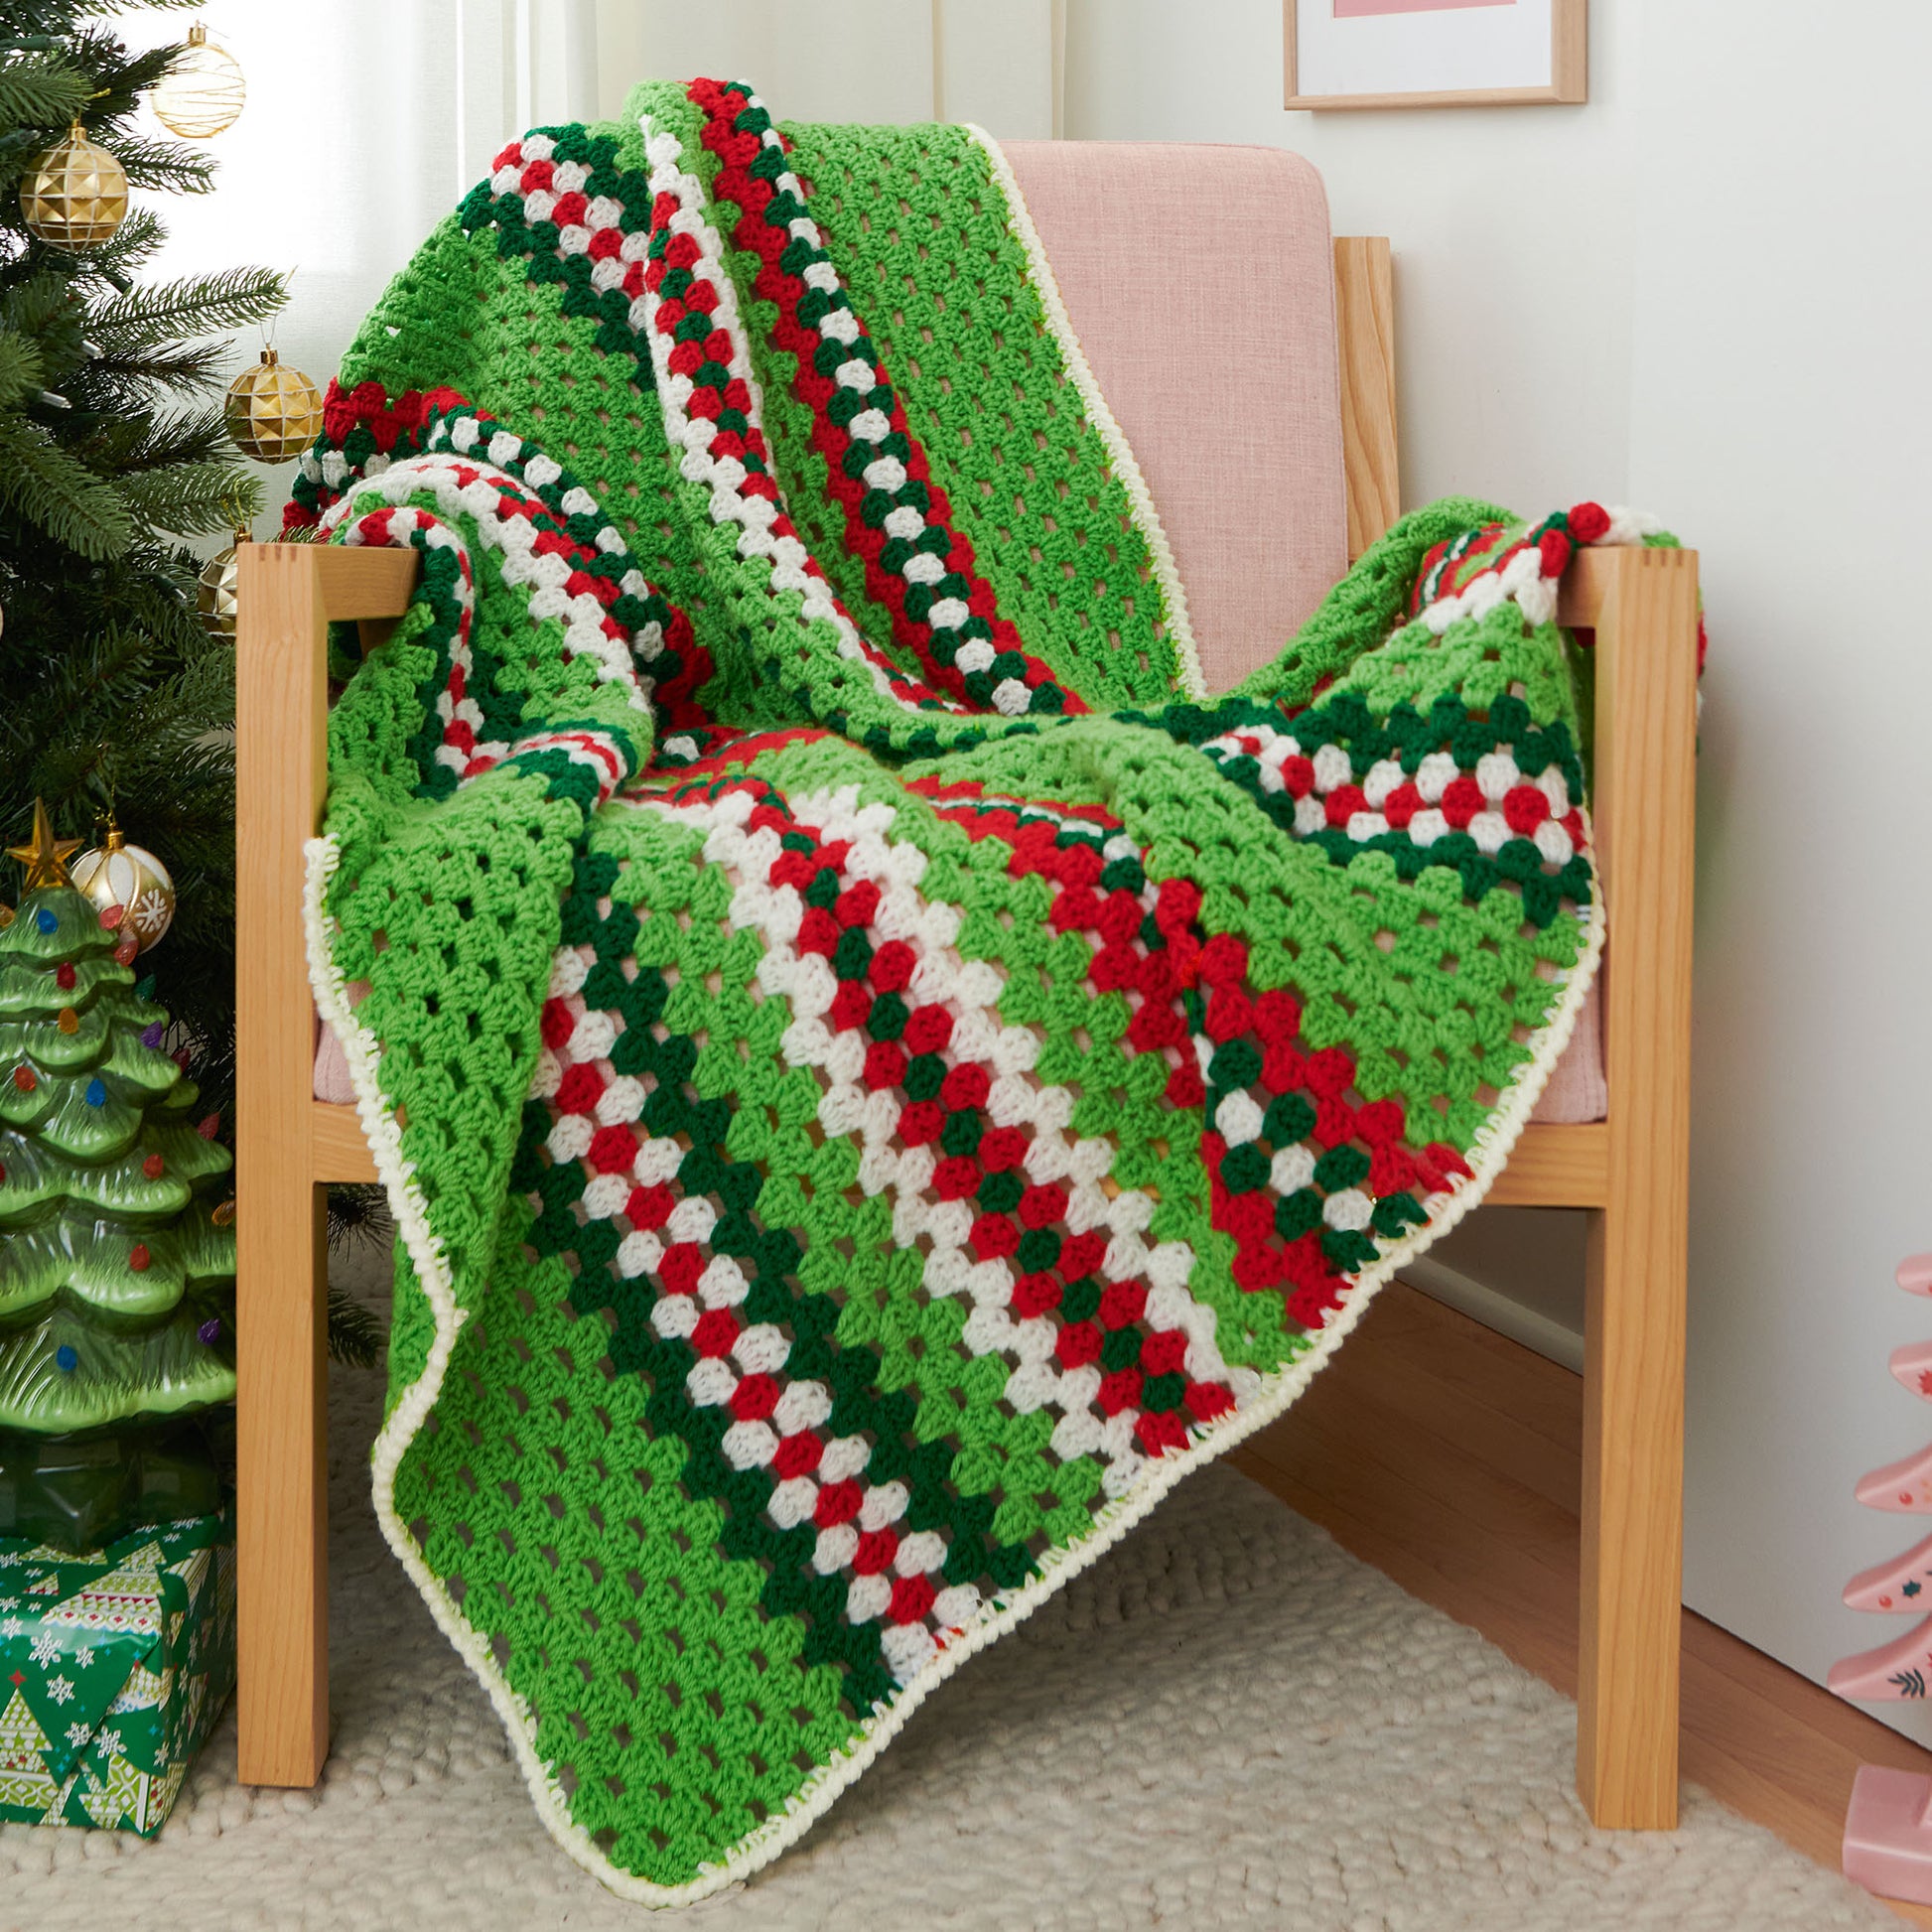 Free Red Heart Crochet Christmas at Granny's Blanket Pattern